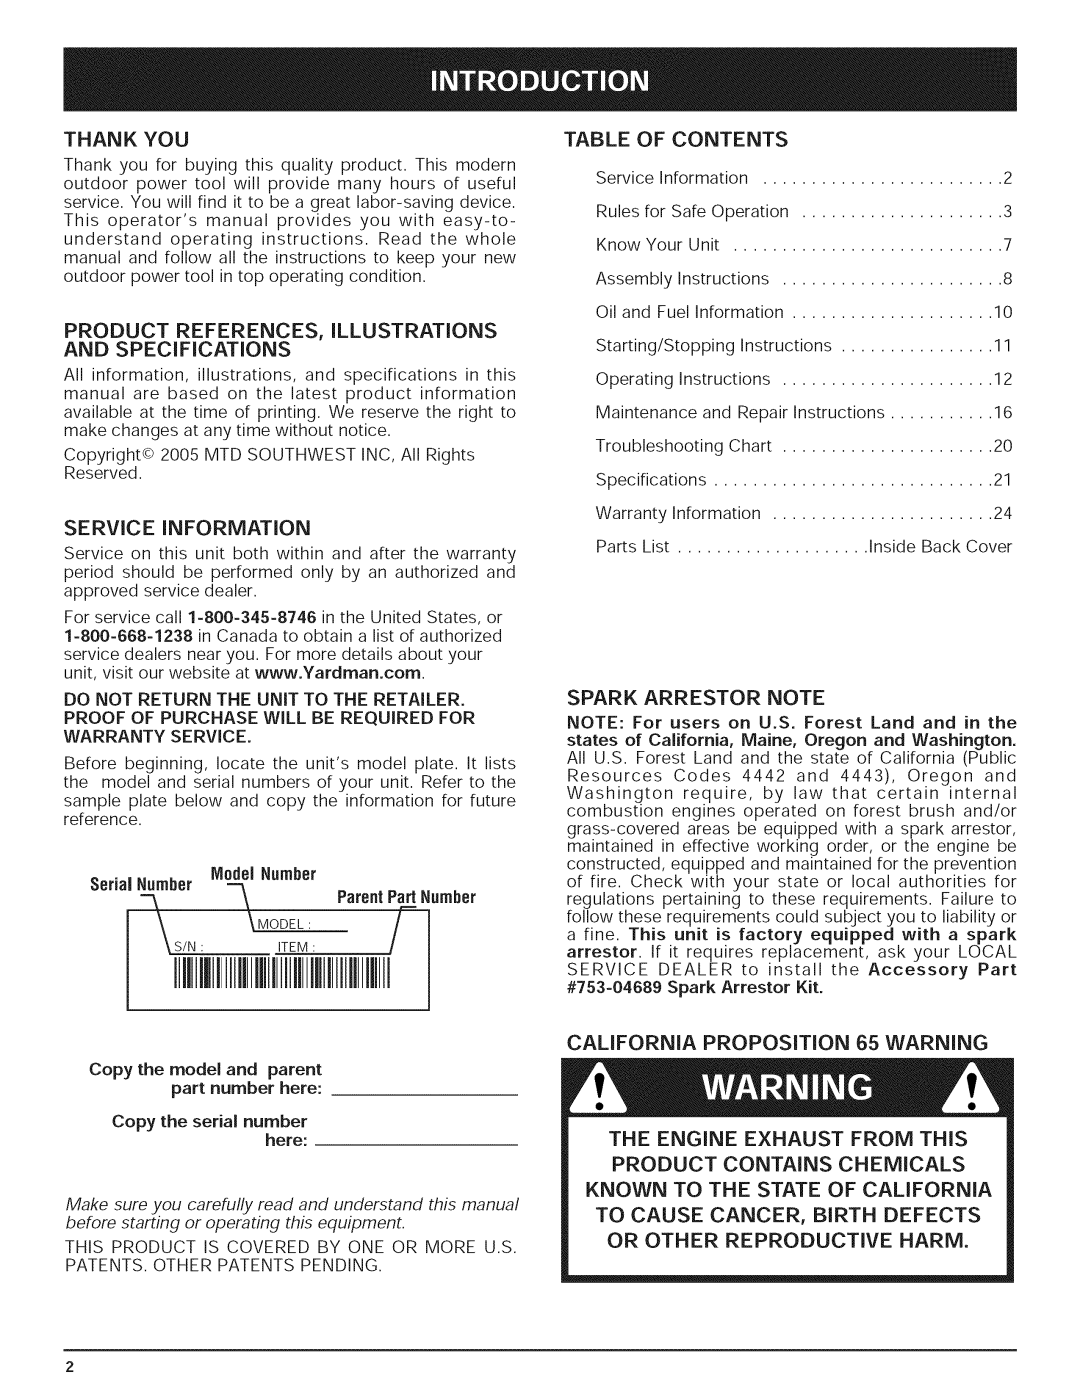 Yard-Man 769.01408 Thank You, Service Information, Table, Of Contents, Spark Arrestor Note, Or Other Reproductive Harm 